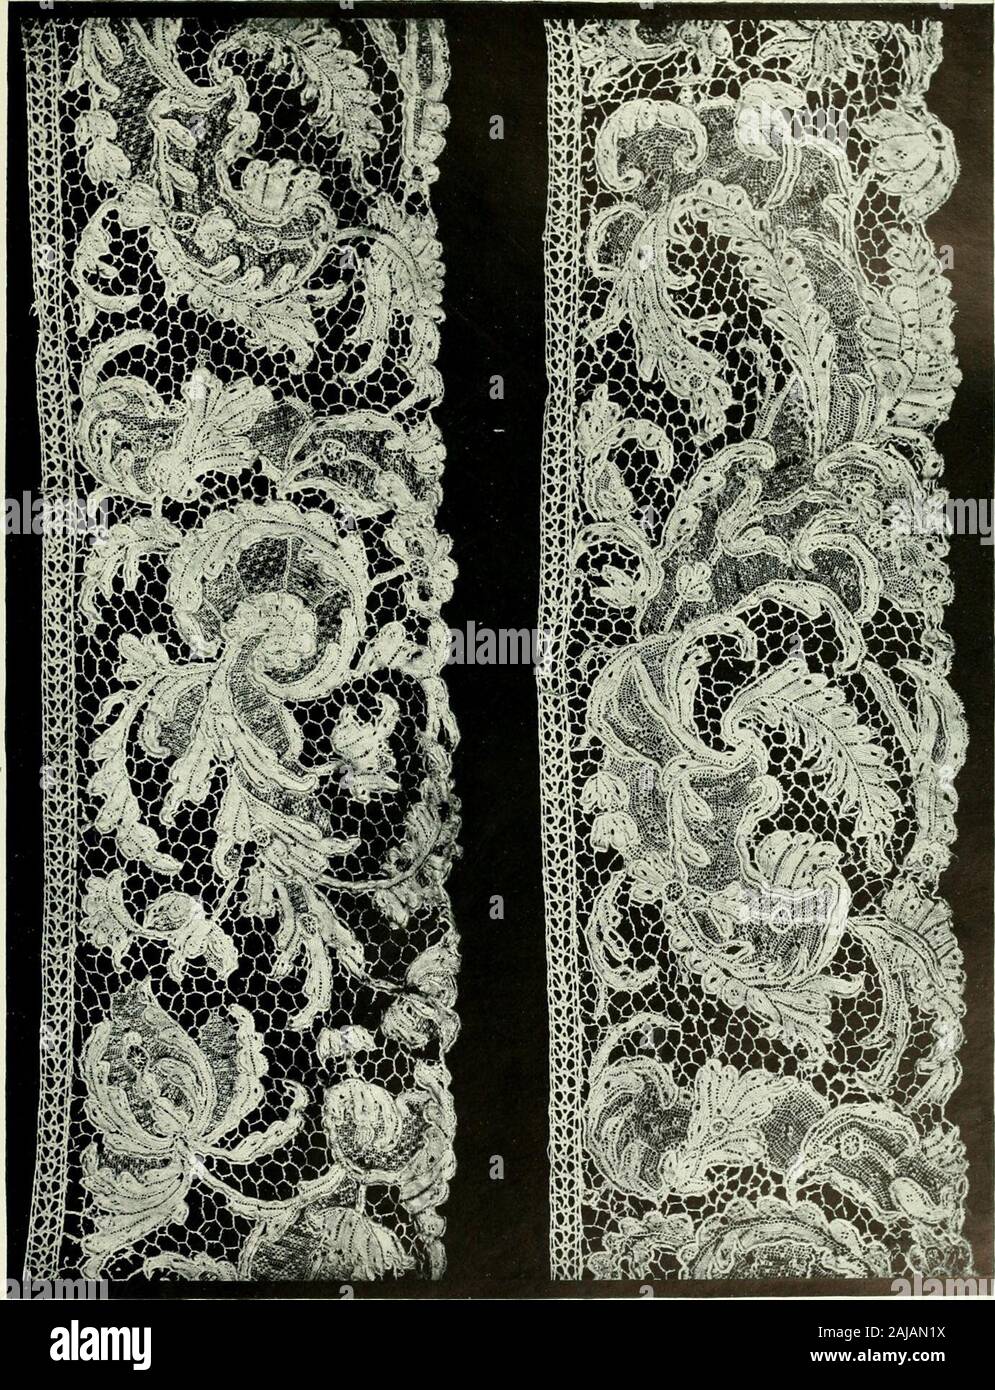 Seven centuries of lace . Plate LVIII. TWO EXAMPLES OF VENETIAN POINT A RESEAU No. I. Needle-point lace usually called Veactian point 4 riseau. The pattern entirely covers the lace and is of conventional floral tvpe :the filhngs are very varied. This lace is not Venetian in design, and was probably made at Sedan. 6 ft. 5 in. No. 3 is a beautiful fragment, actual size, of Venetianpoint 4 rfeeau n, ear y i i cen my Venice, late lyih century. Plate LIX A BORDER OF NEEDLE-POINT LACE, POSSIBLY VENETIAN,THOUGH THE STYLE IS FRENCH The pattern is of leafy scrolls and conventional flowers well marked, Stock Photo